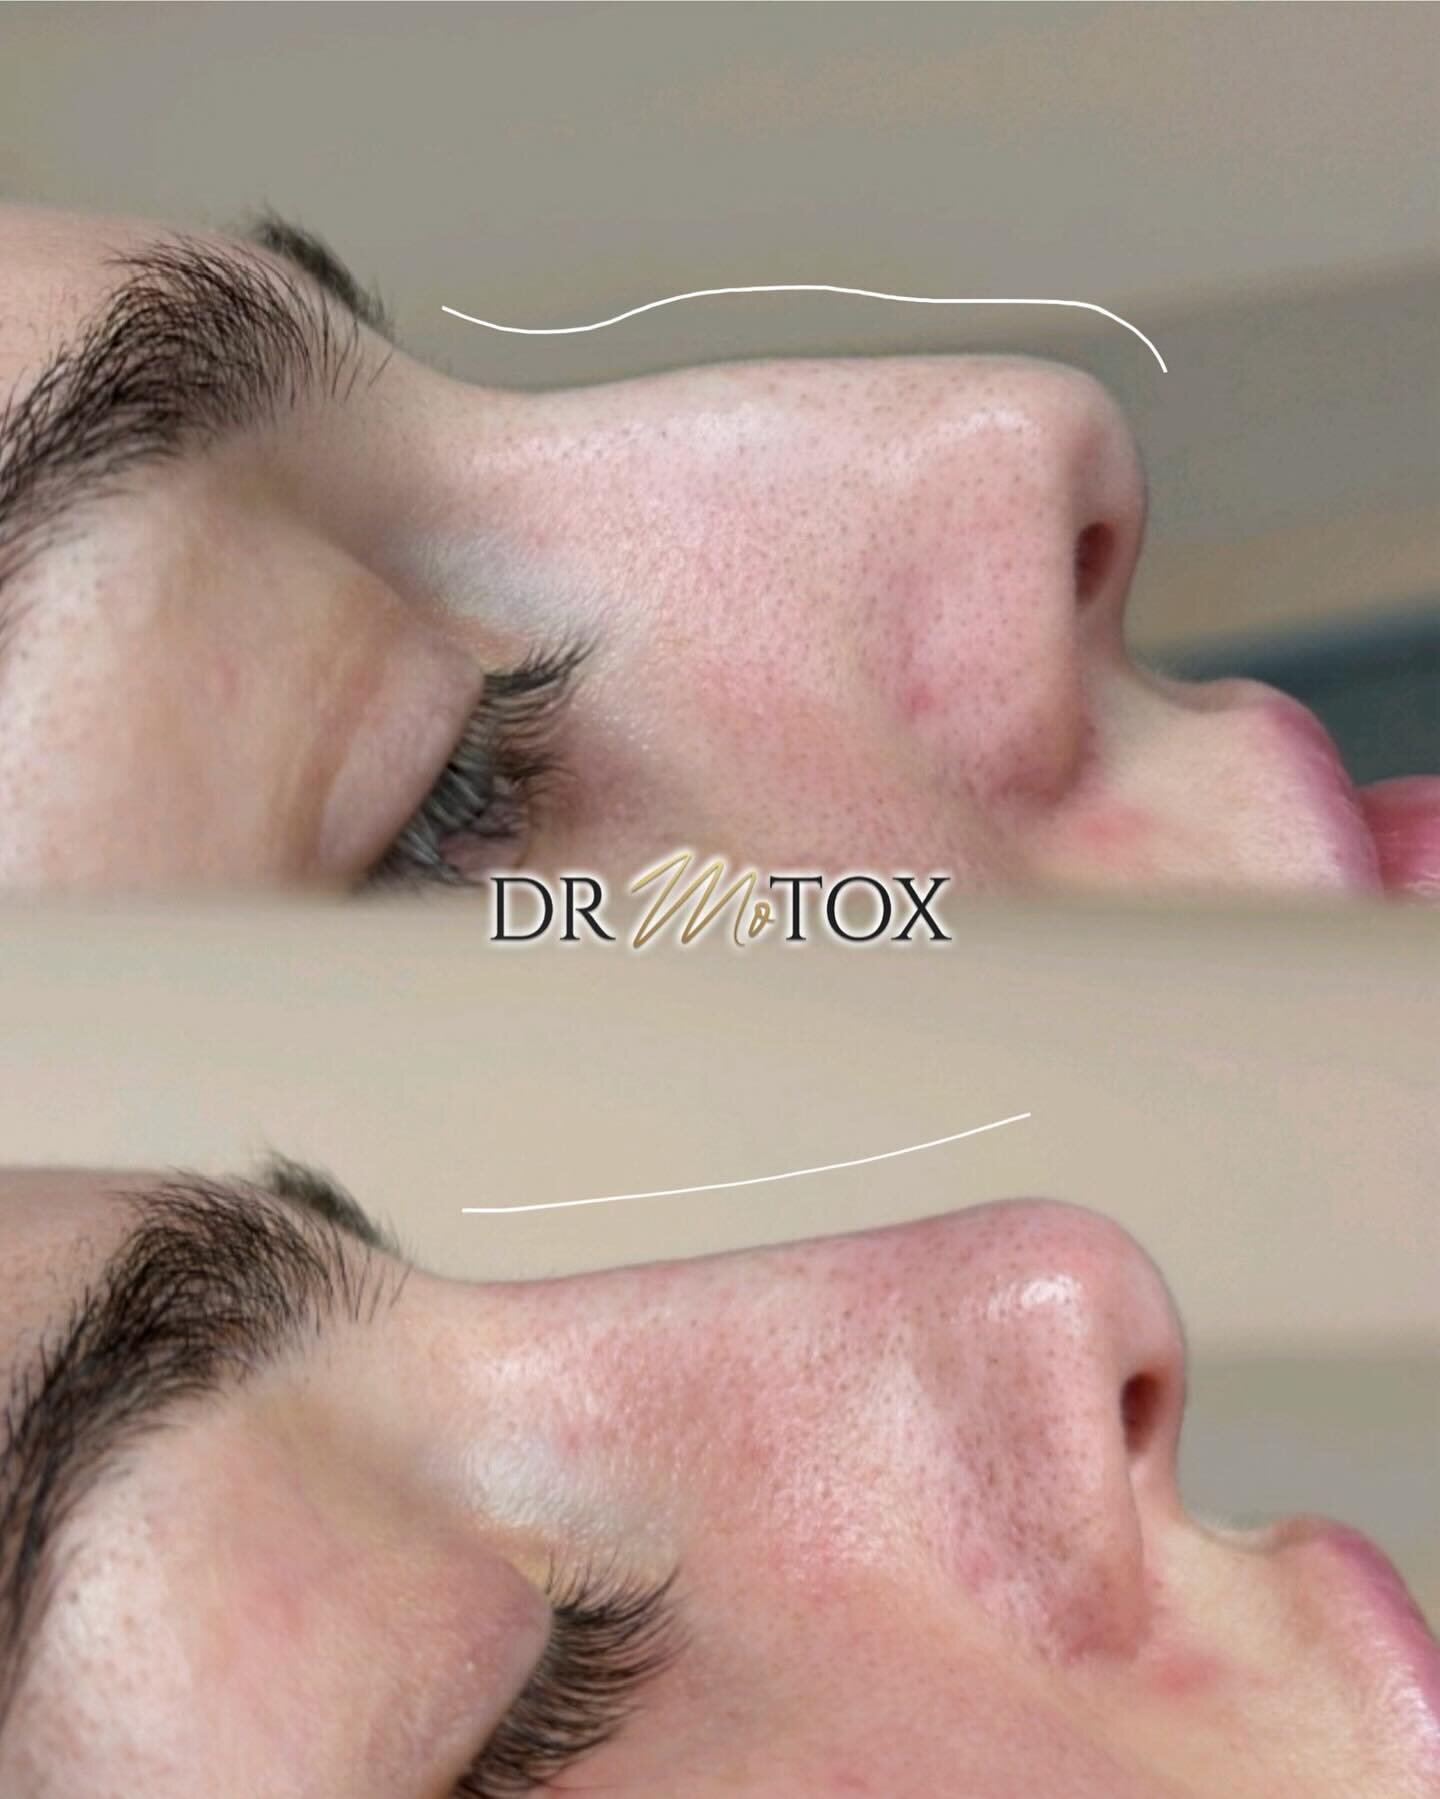 ✨𝐀 𝐃𝐫 𝐌𝐨𝐭𝐨𝐱 𝐍𝐨𝐬𝐞✨ Our famous Non-Surgical Rhinoplasty results are achieved by Dr Mo&rsquo;s unique approach &amp; techniques, giving amazing natural results like this! Have you booked in for your appointment? Your nose transformation awai